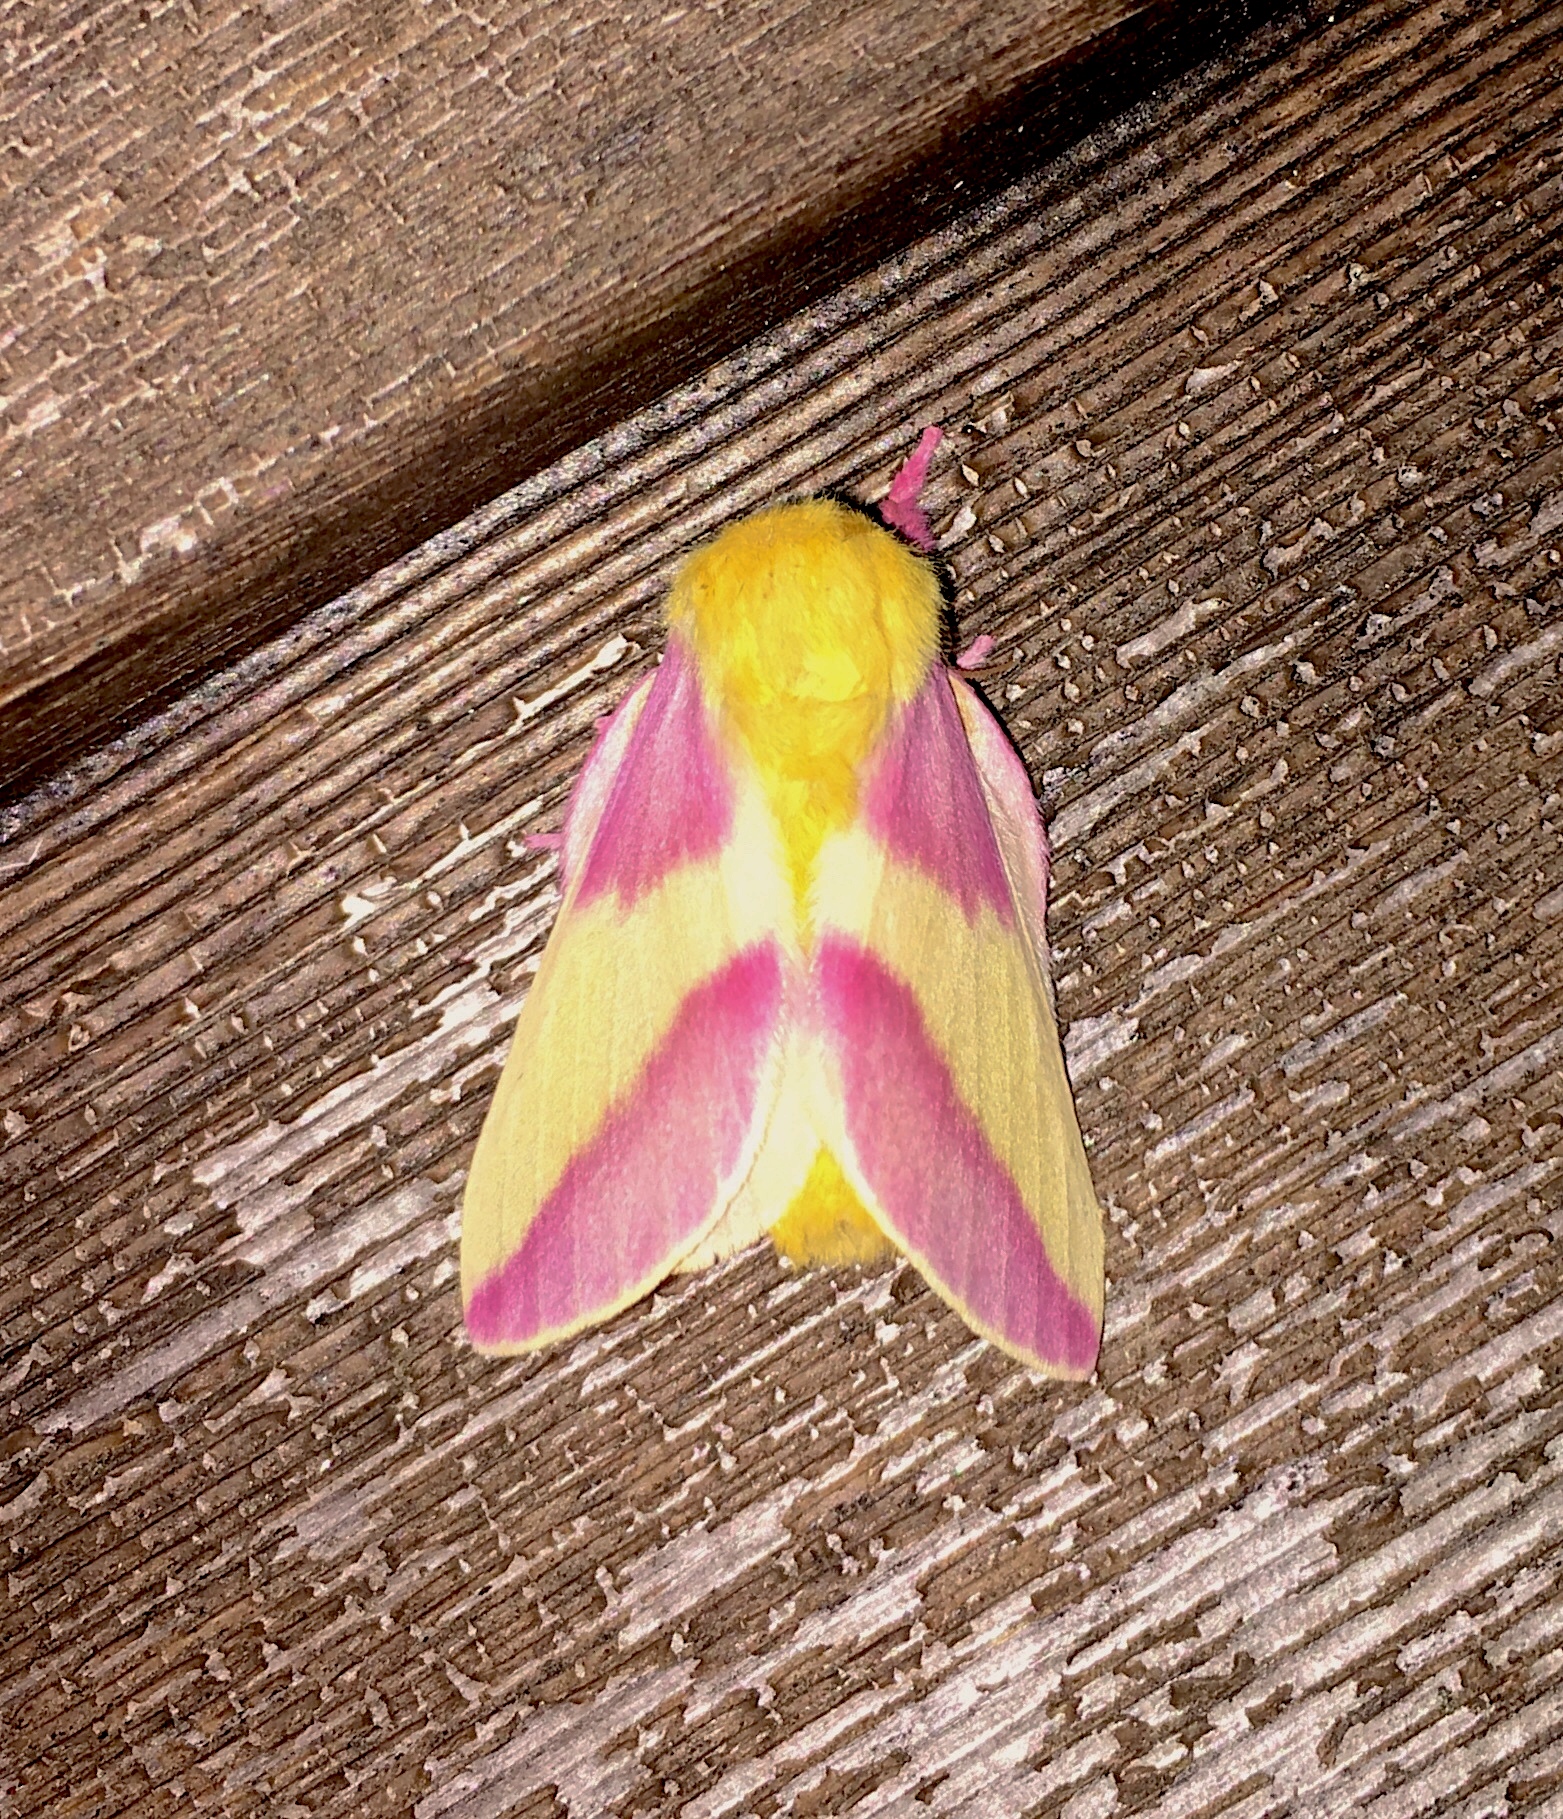 Rosy maple moths are my new fav type of moth